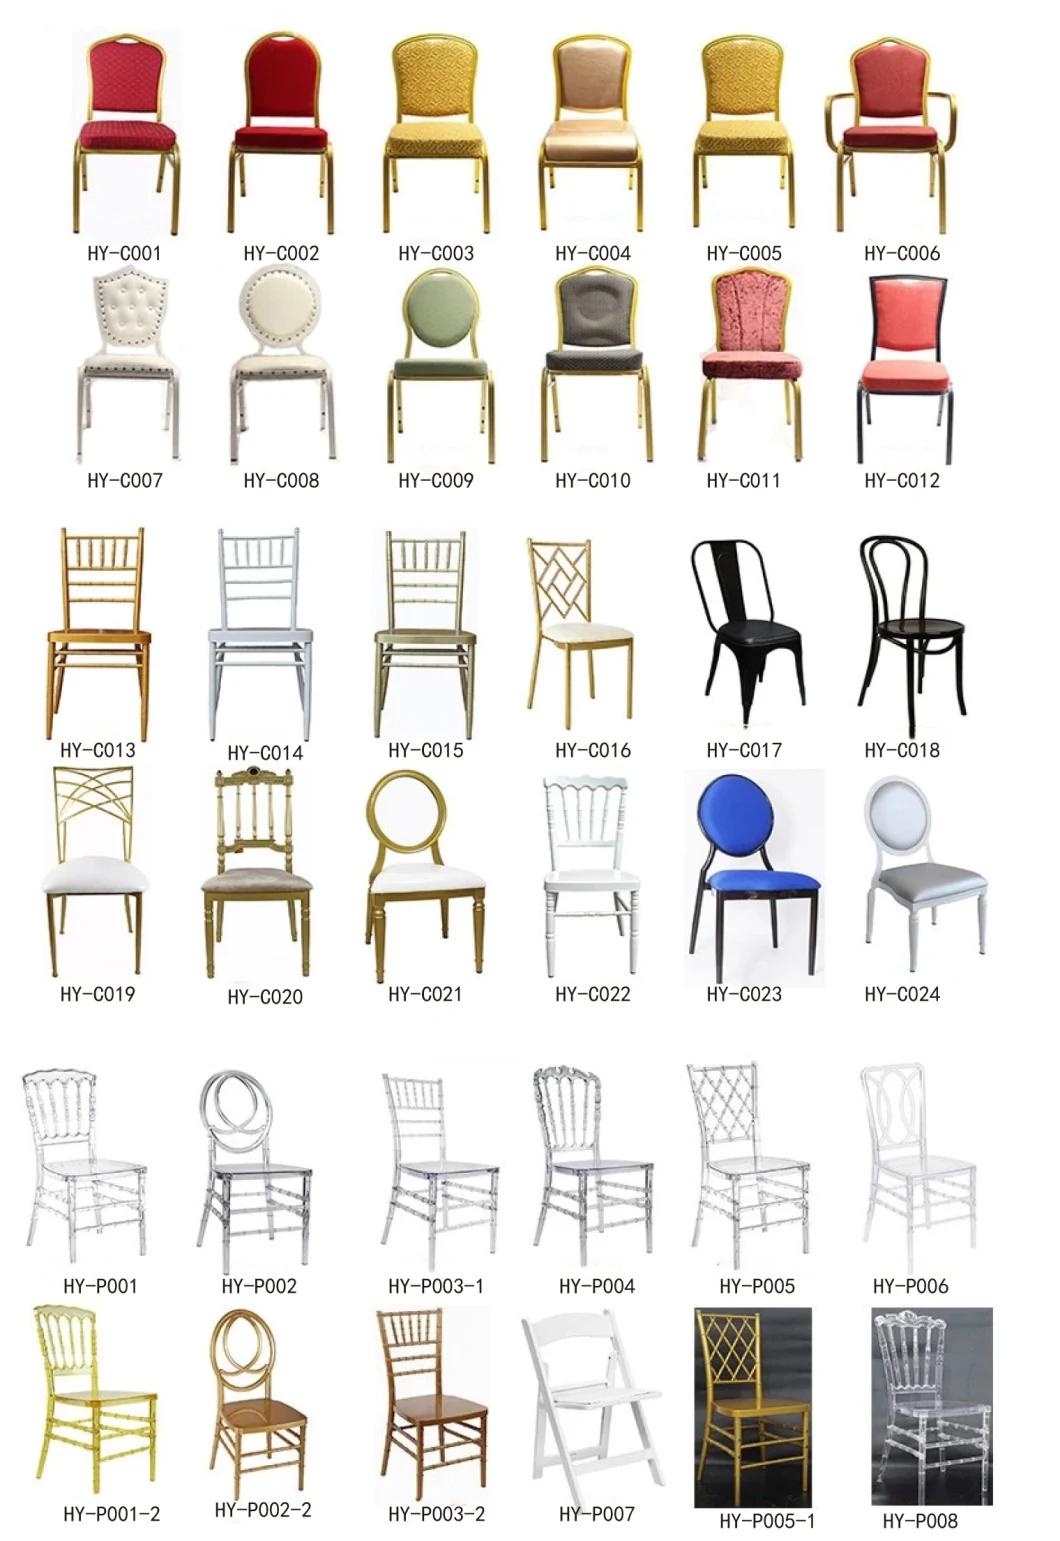 Low Back Banquet Chair for Training Reception Event Living Room Hotel Leiusre Furniture Dome Back Stacking Dining Chair